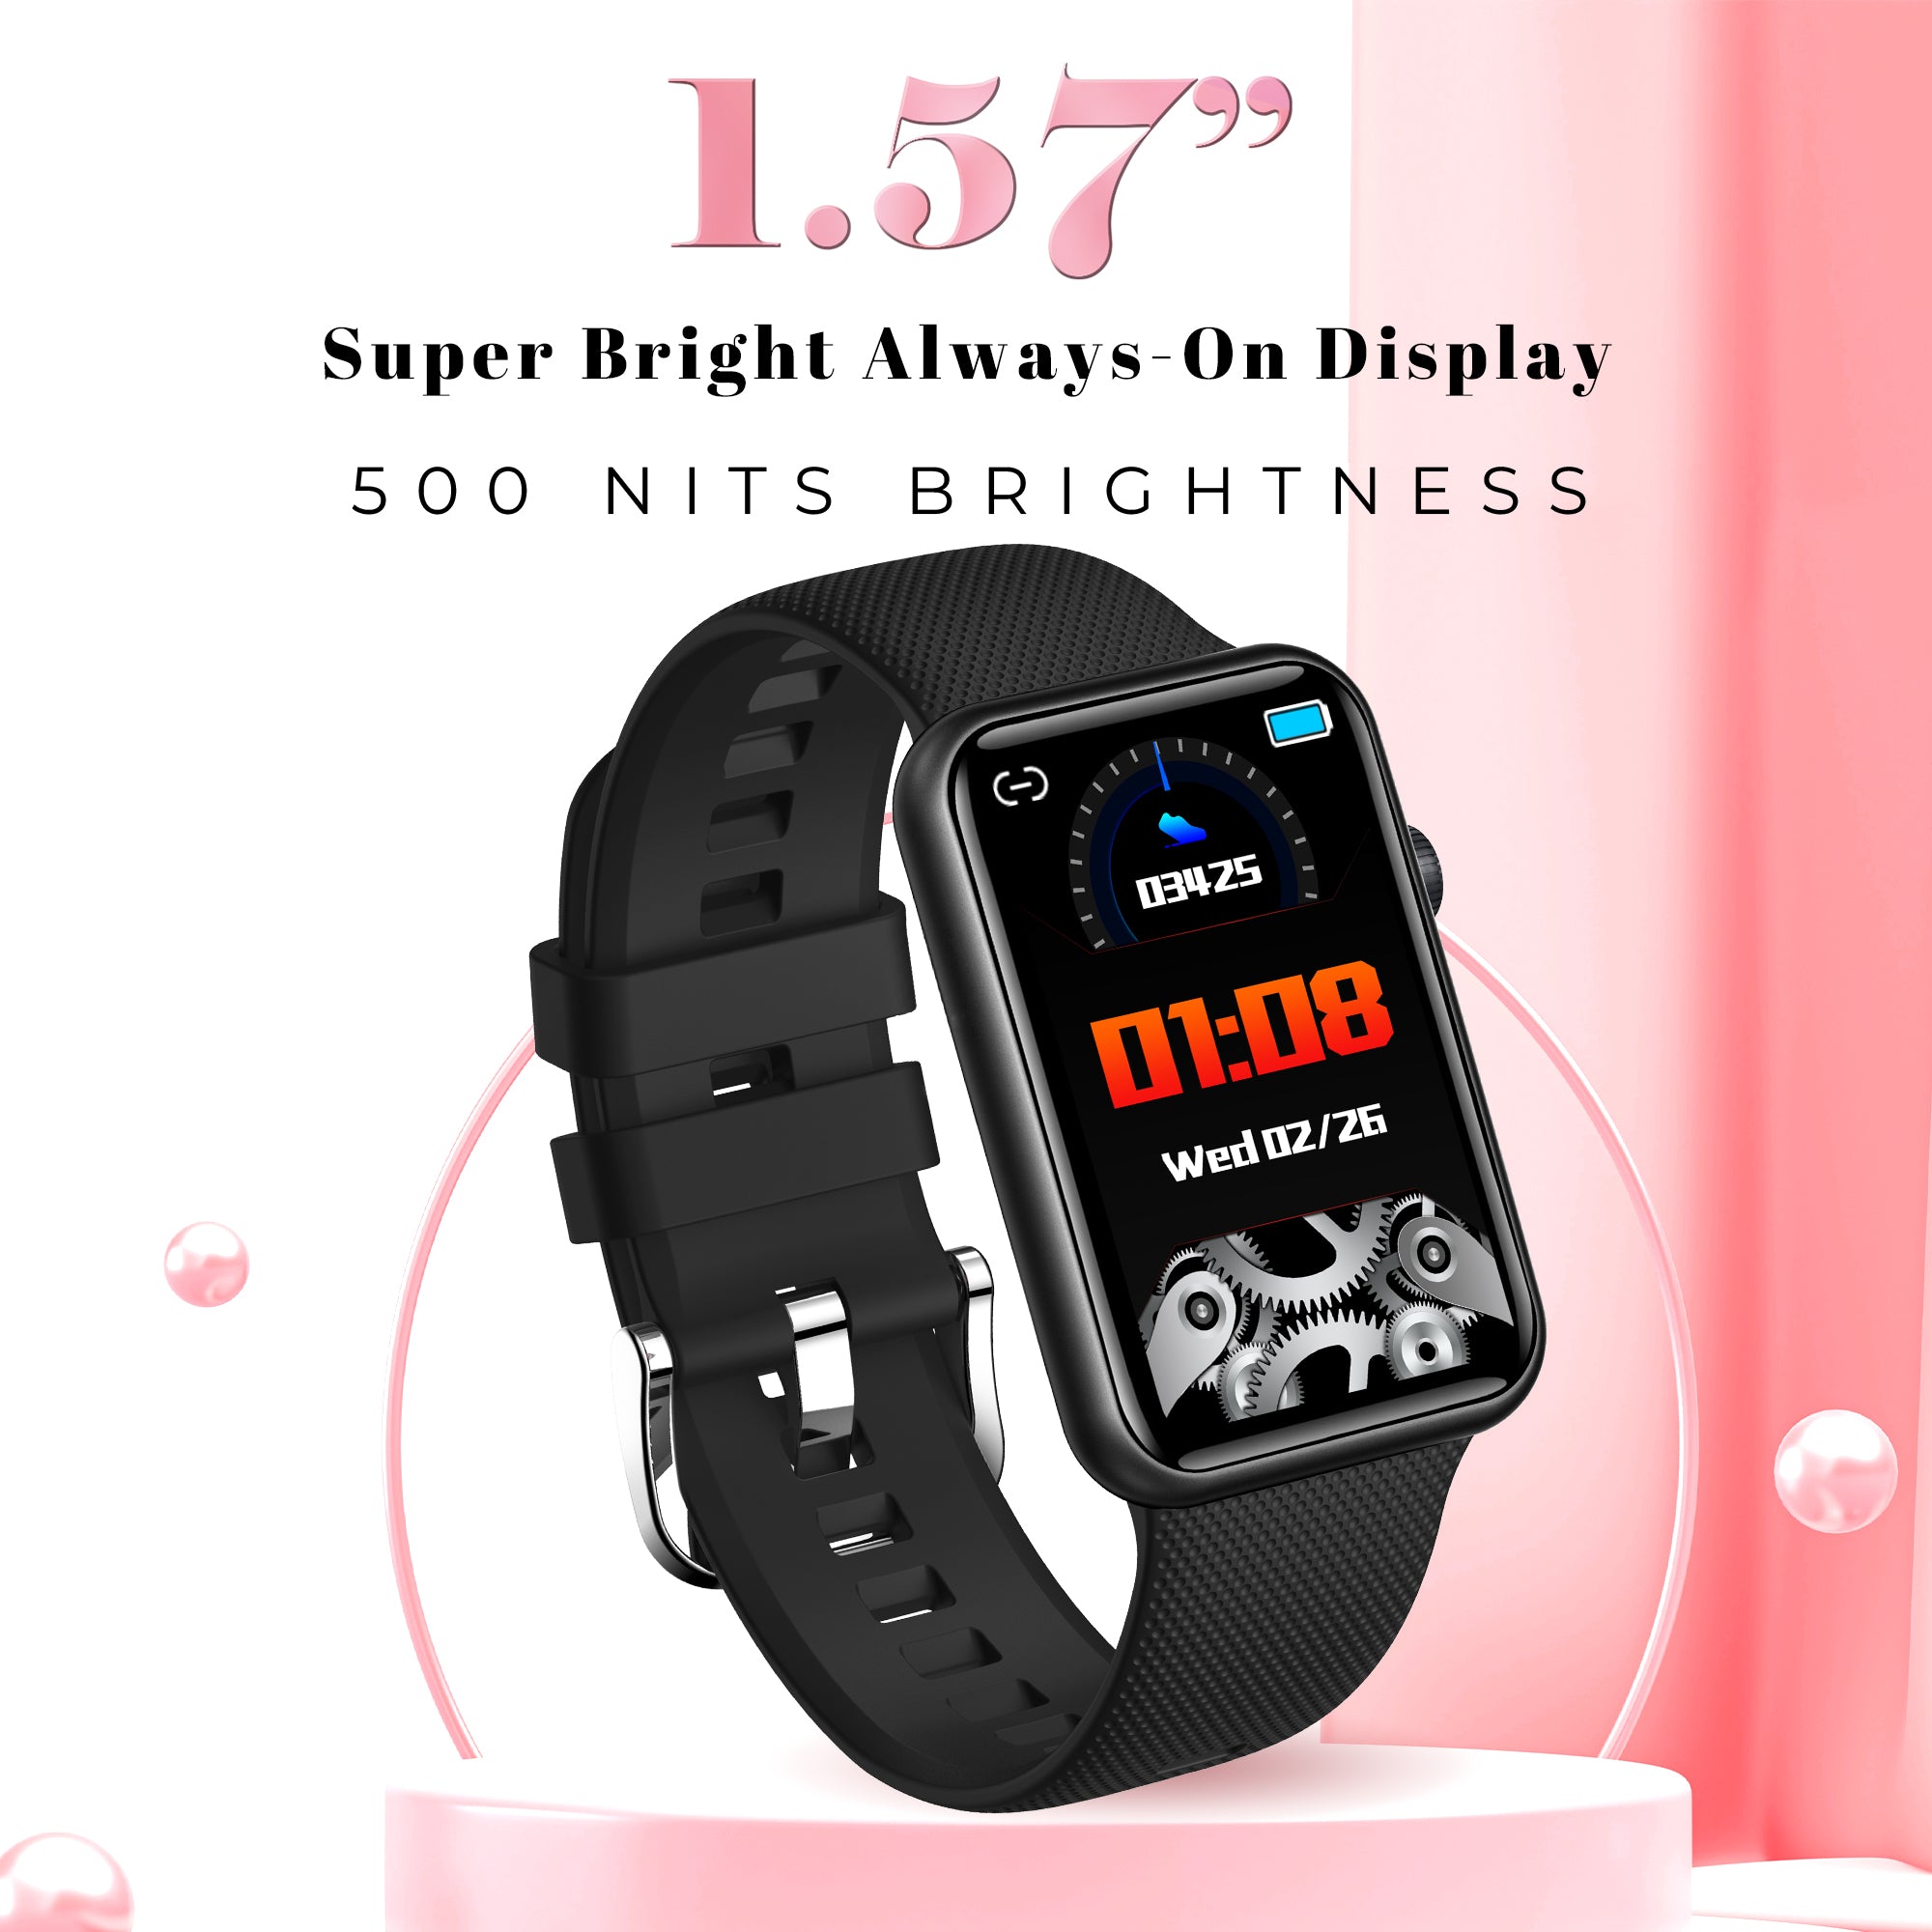 Gizmore Slate 3.98Cm (1.57)  IPS Full Touch BT Calling with AI Voice Assistance Smartwatch